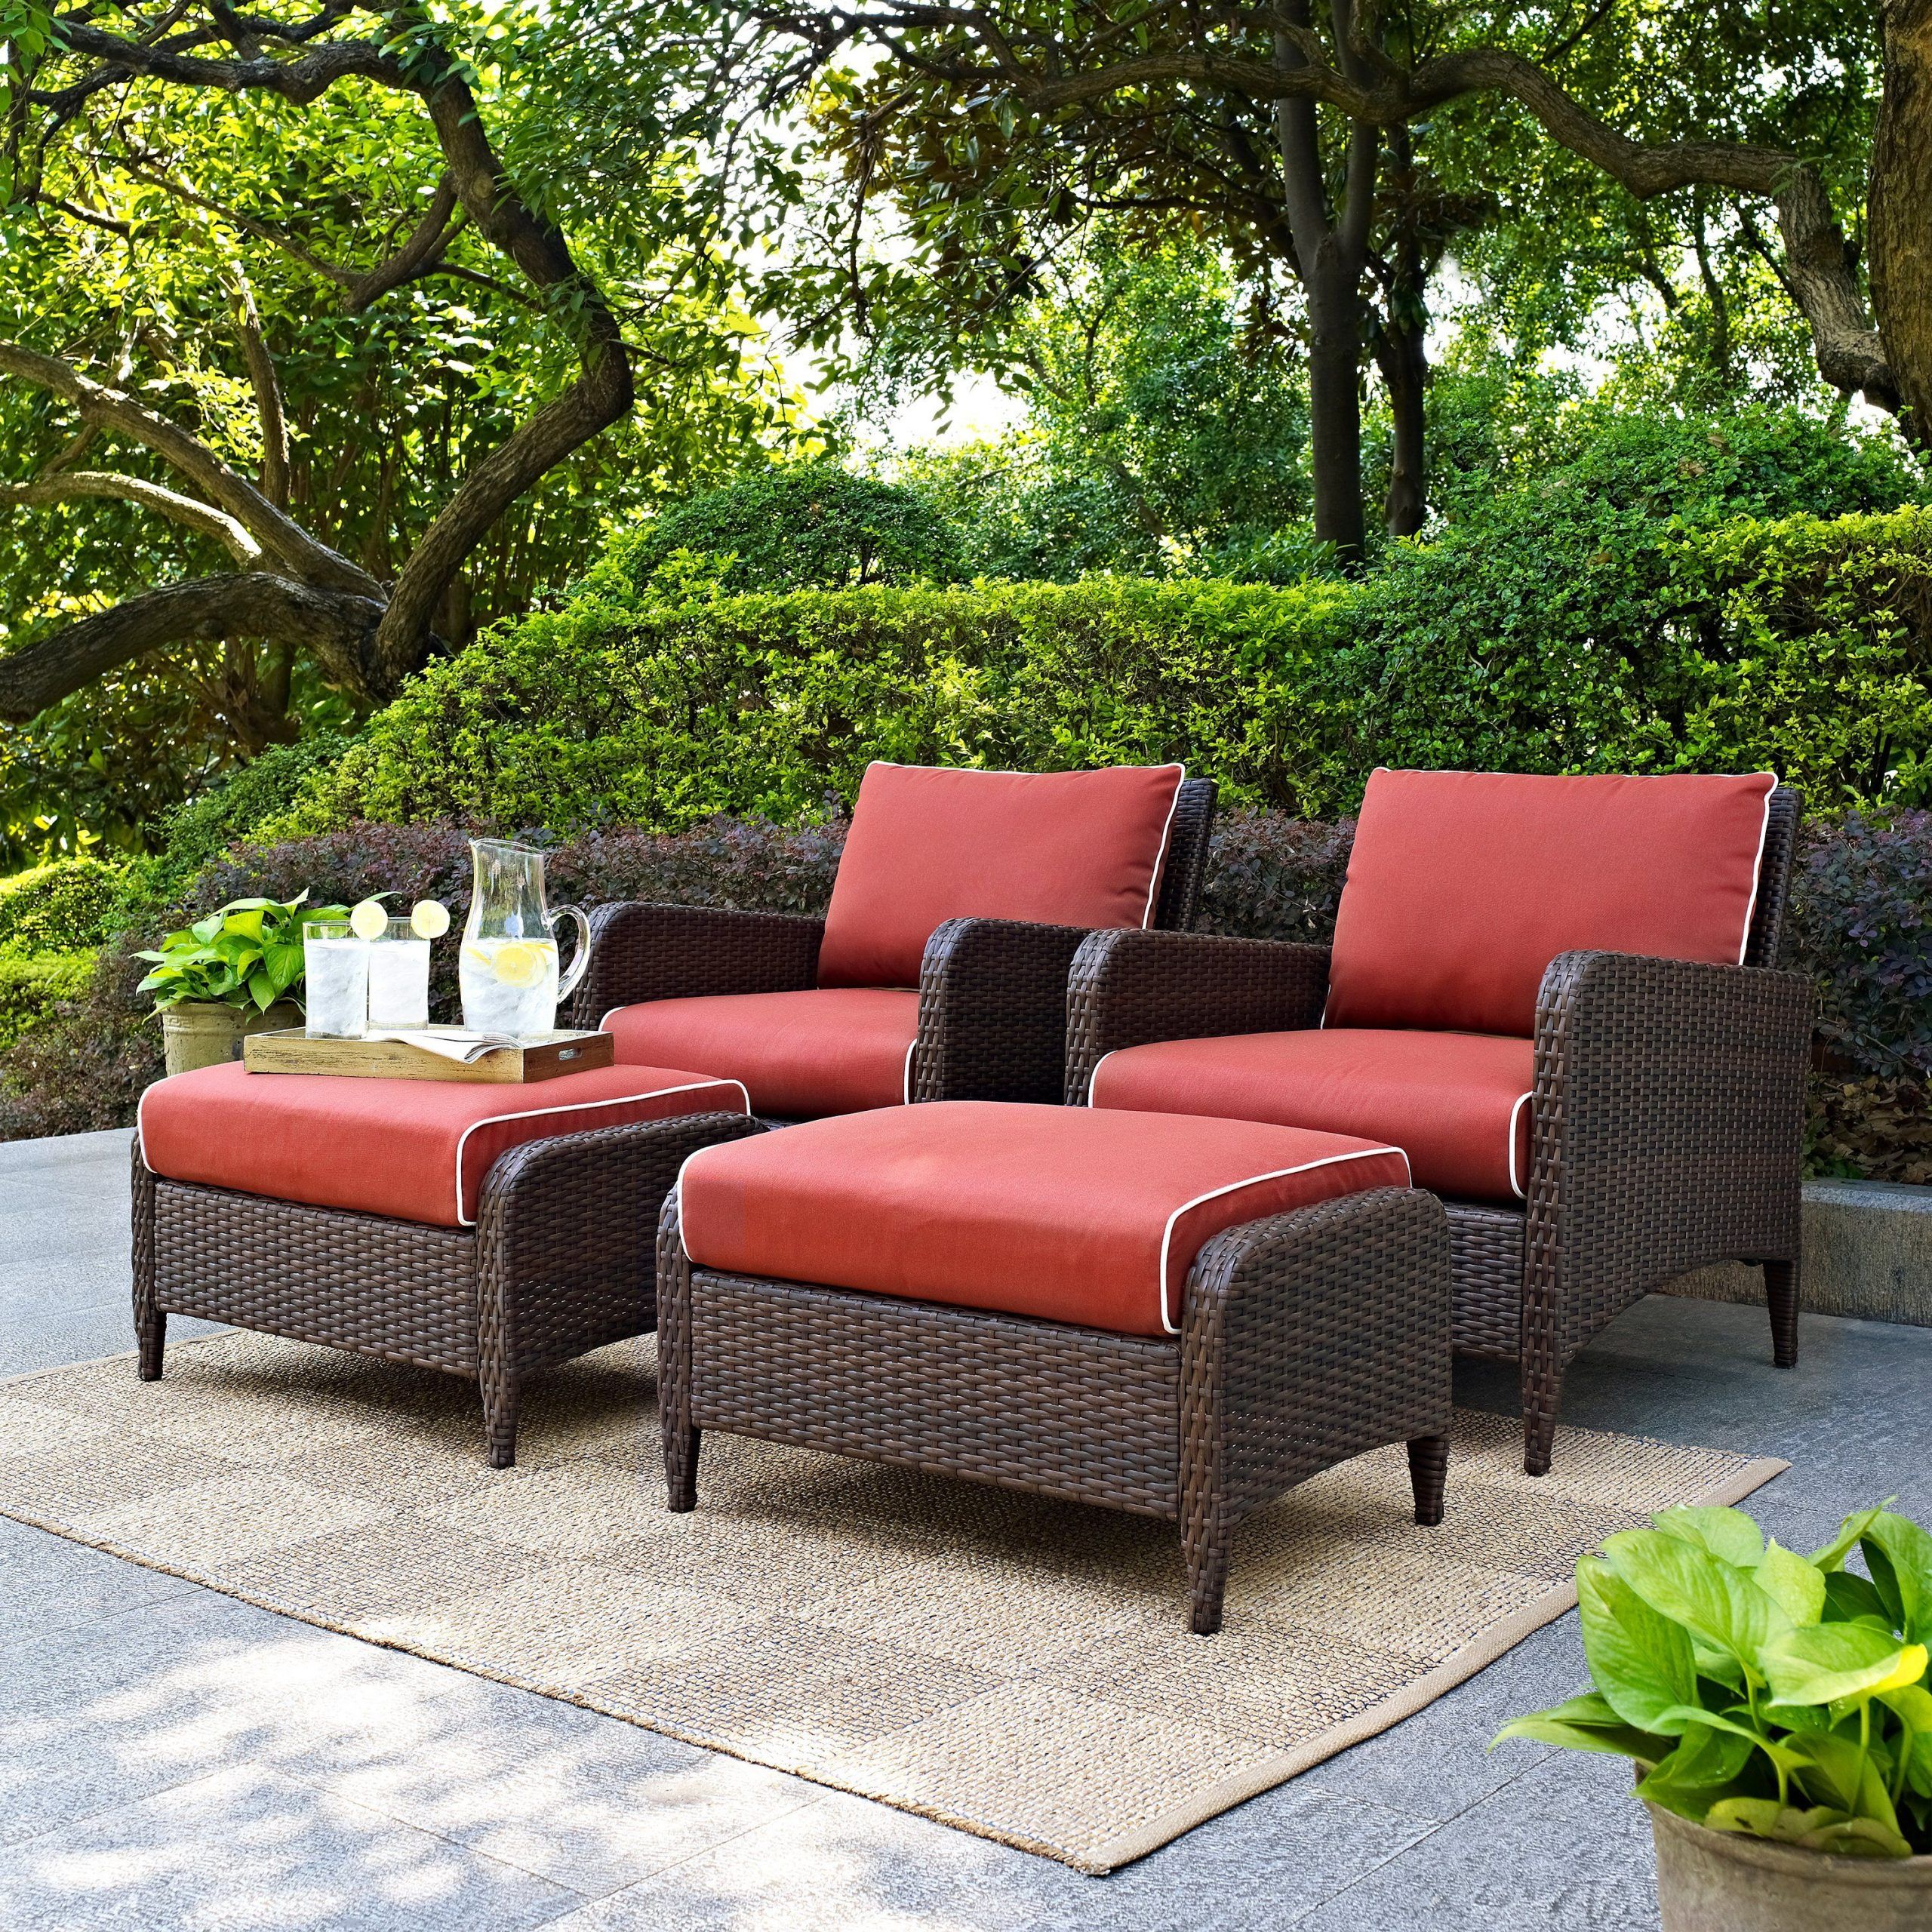 Sangria 4 Piece Wicker Outdoor Patio Furniture Set – Kiawah In 2020 Pertaining To 4 Piece Outdoor Wicker Seating Sets (View 2 of 15)